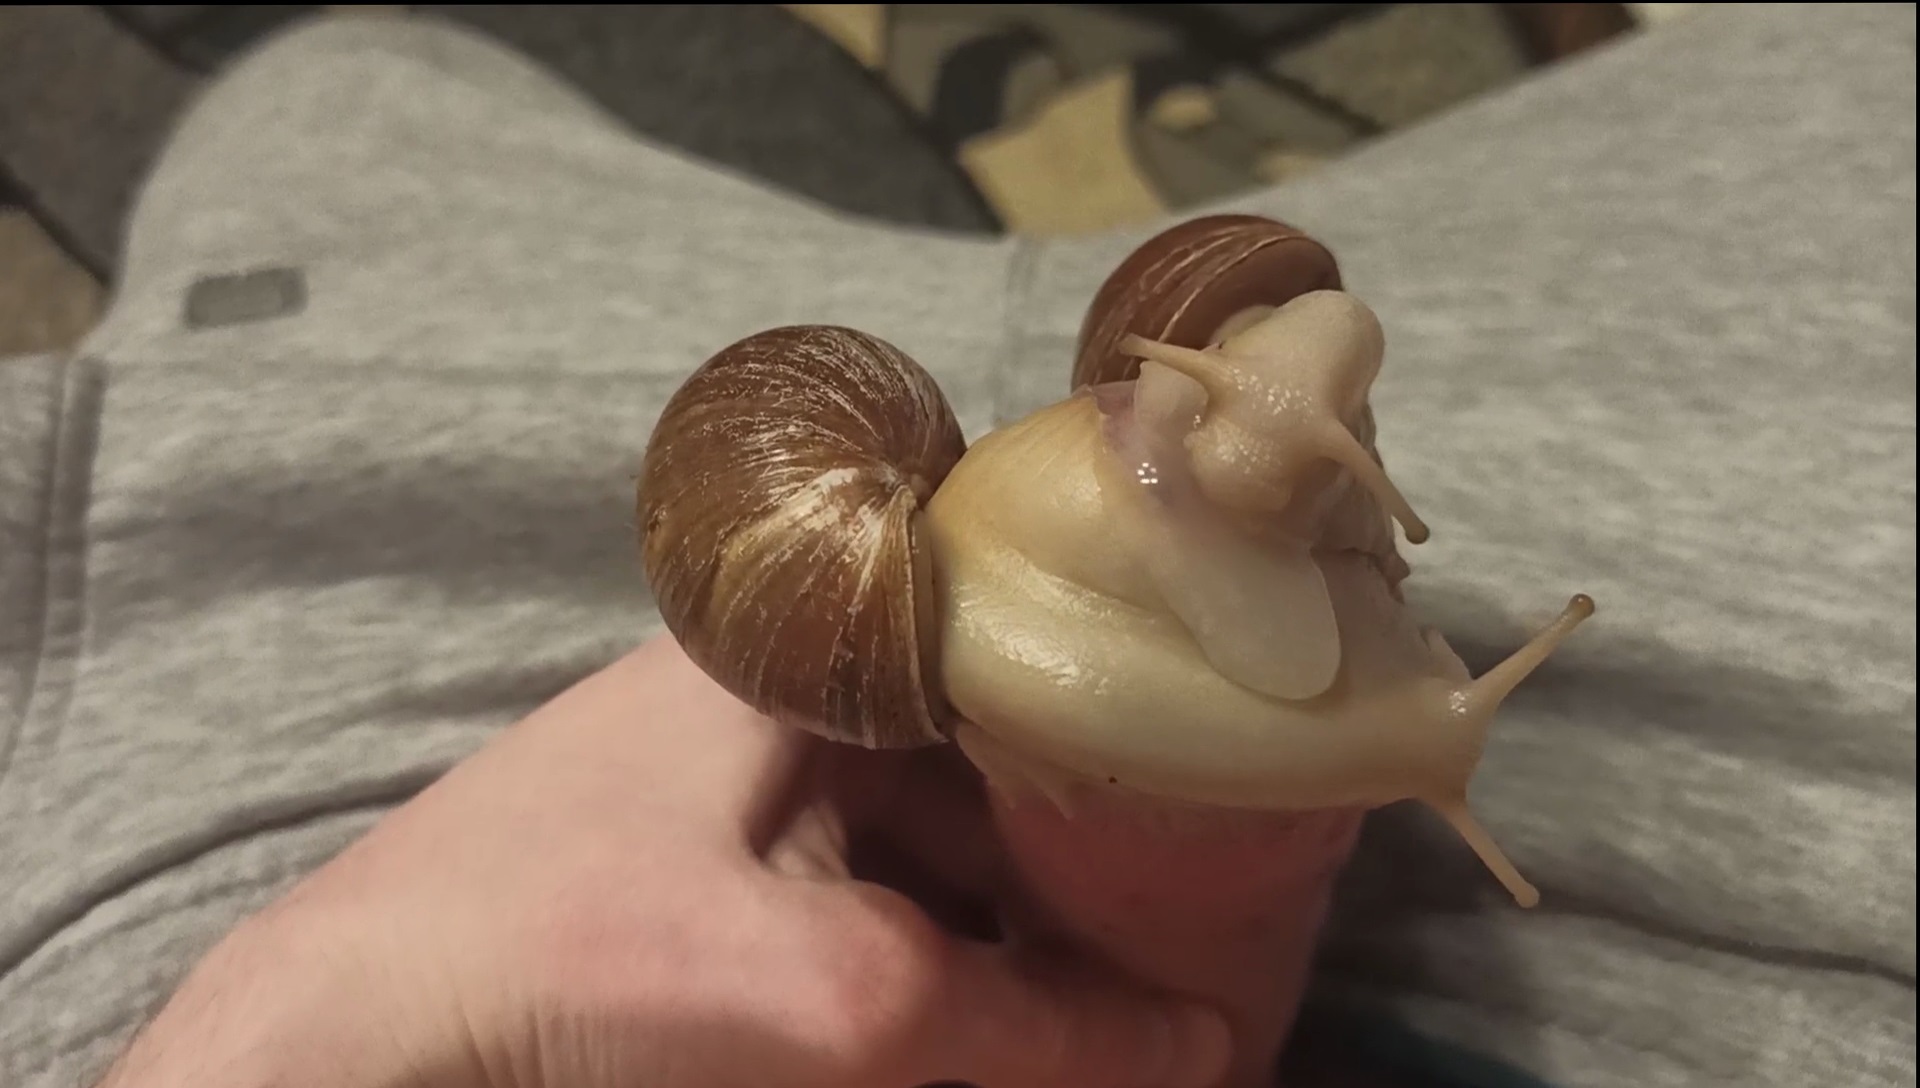 Poor Dick Animated Porn - Two giant snails milk my poor cock with ease. - ThisVid.com